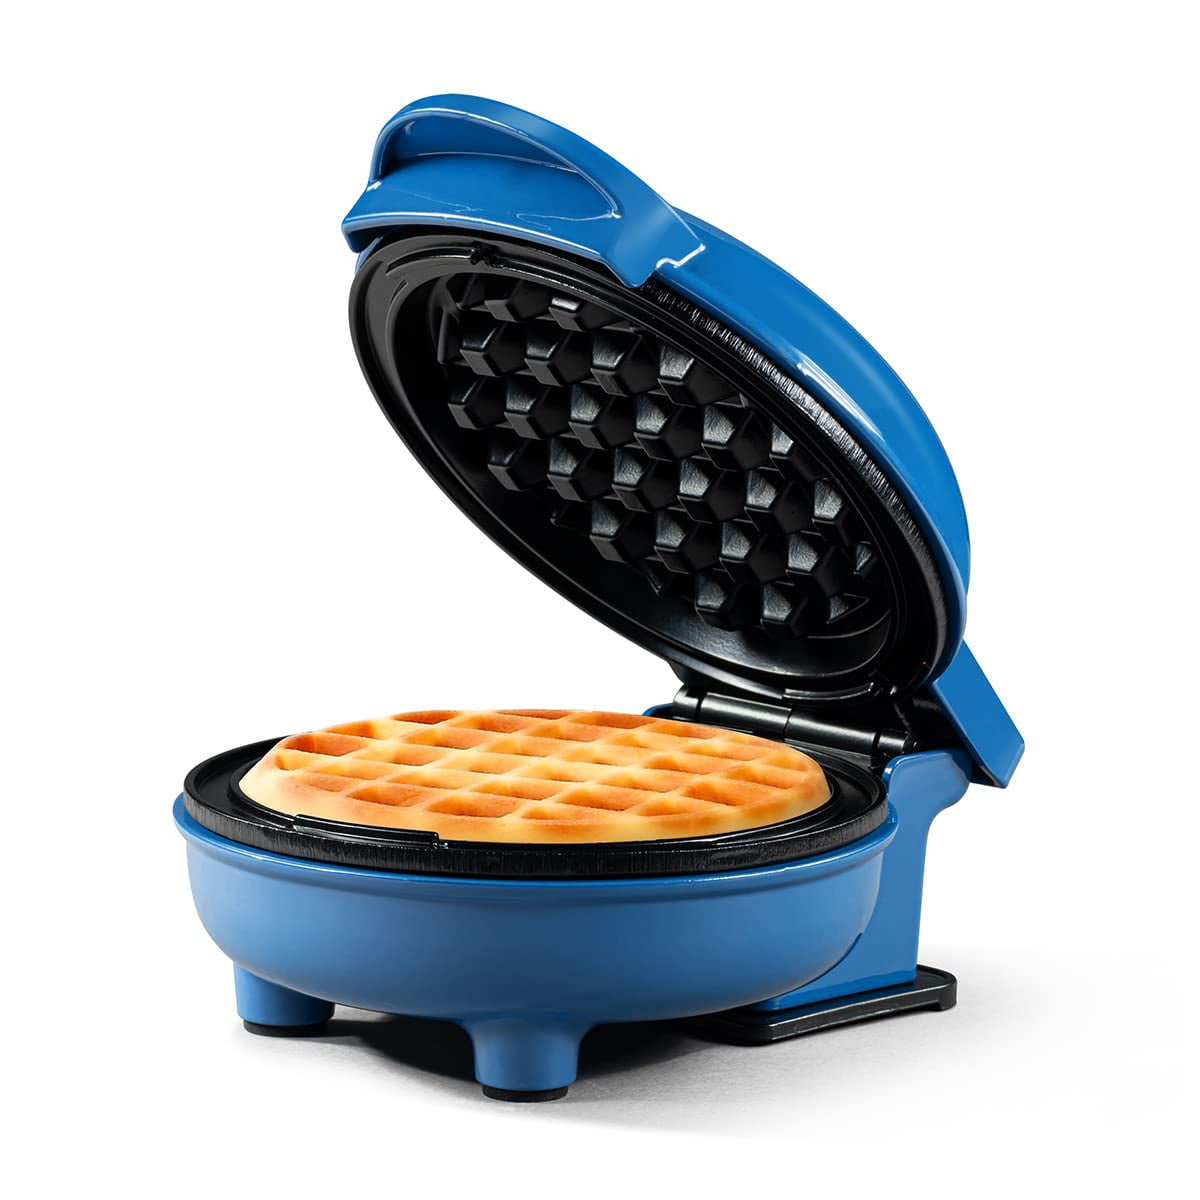 Sanalaiv Mini Waffle Maker, Small Waffle Maker, Nonstick Chaffle Maker for  Hash Browns, Keto Chaffles with easy to clean, PFOA Free, 4 Inch (Blue)